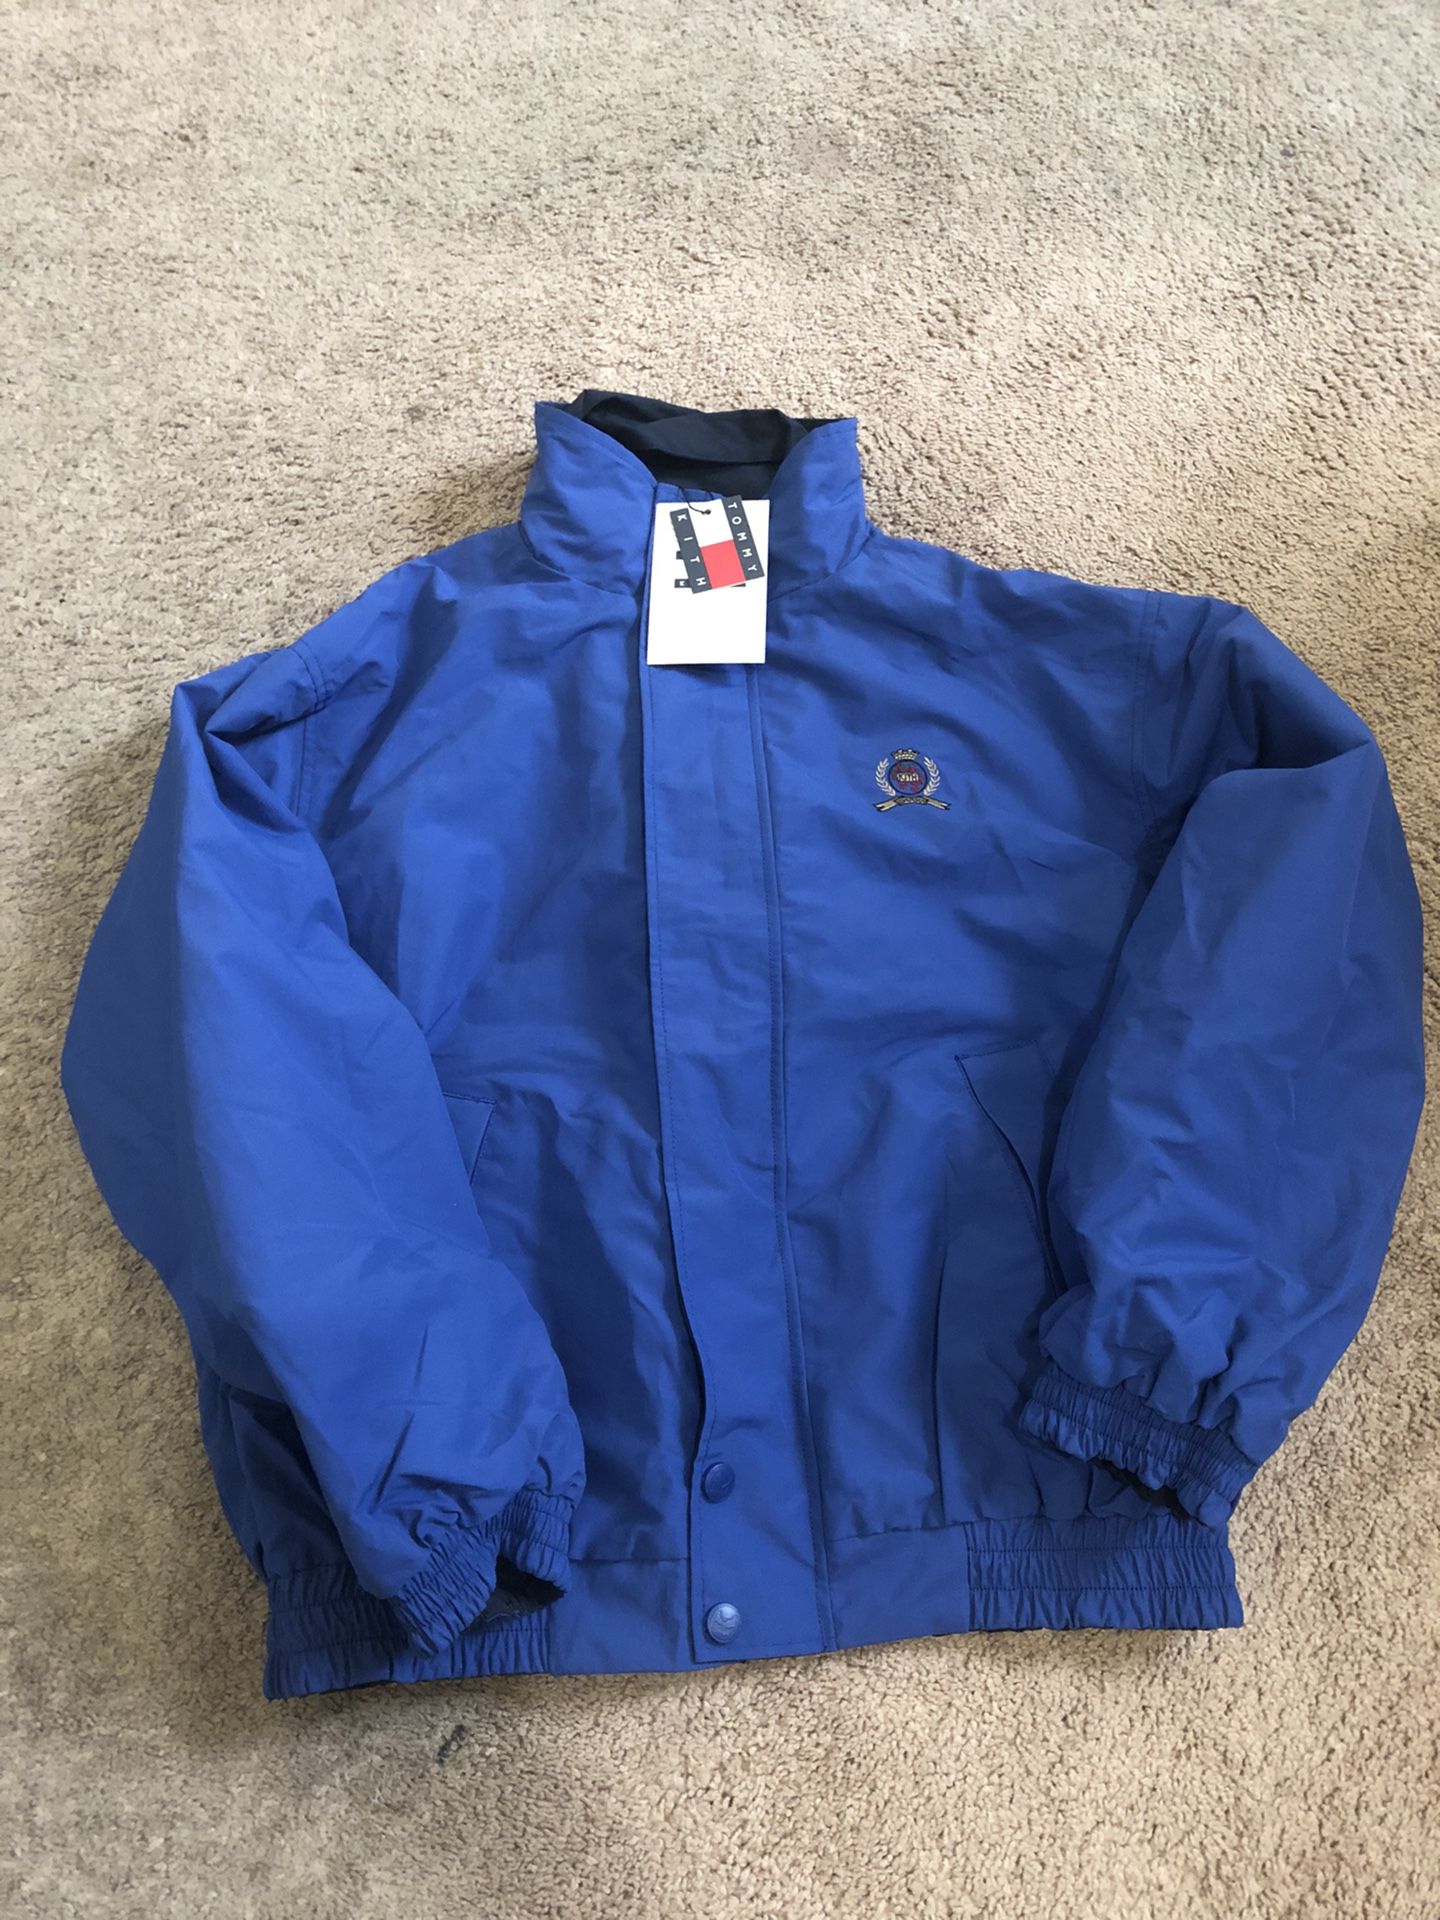 Kith X Tommy Hilfiger Jacket Reversible S